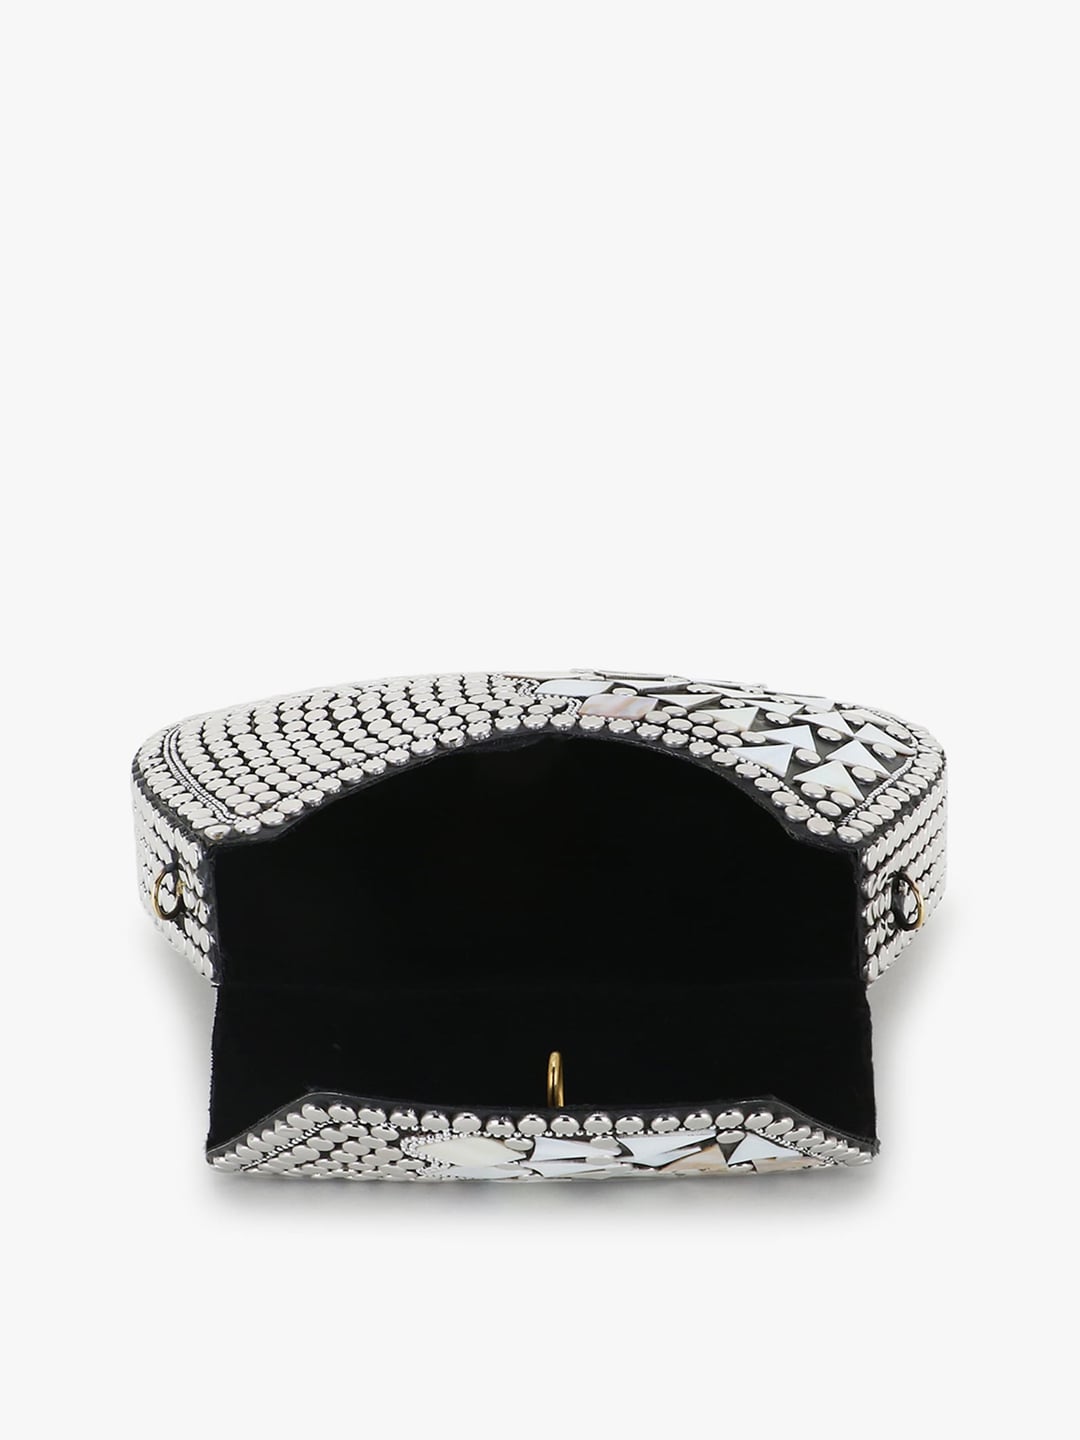 Anekaant Silver-Toned & Black Embellished Half Moon Clutch - Distacart